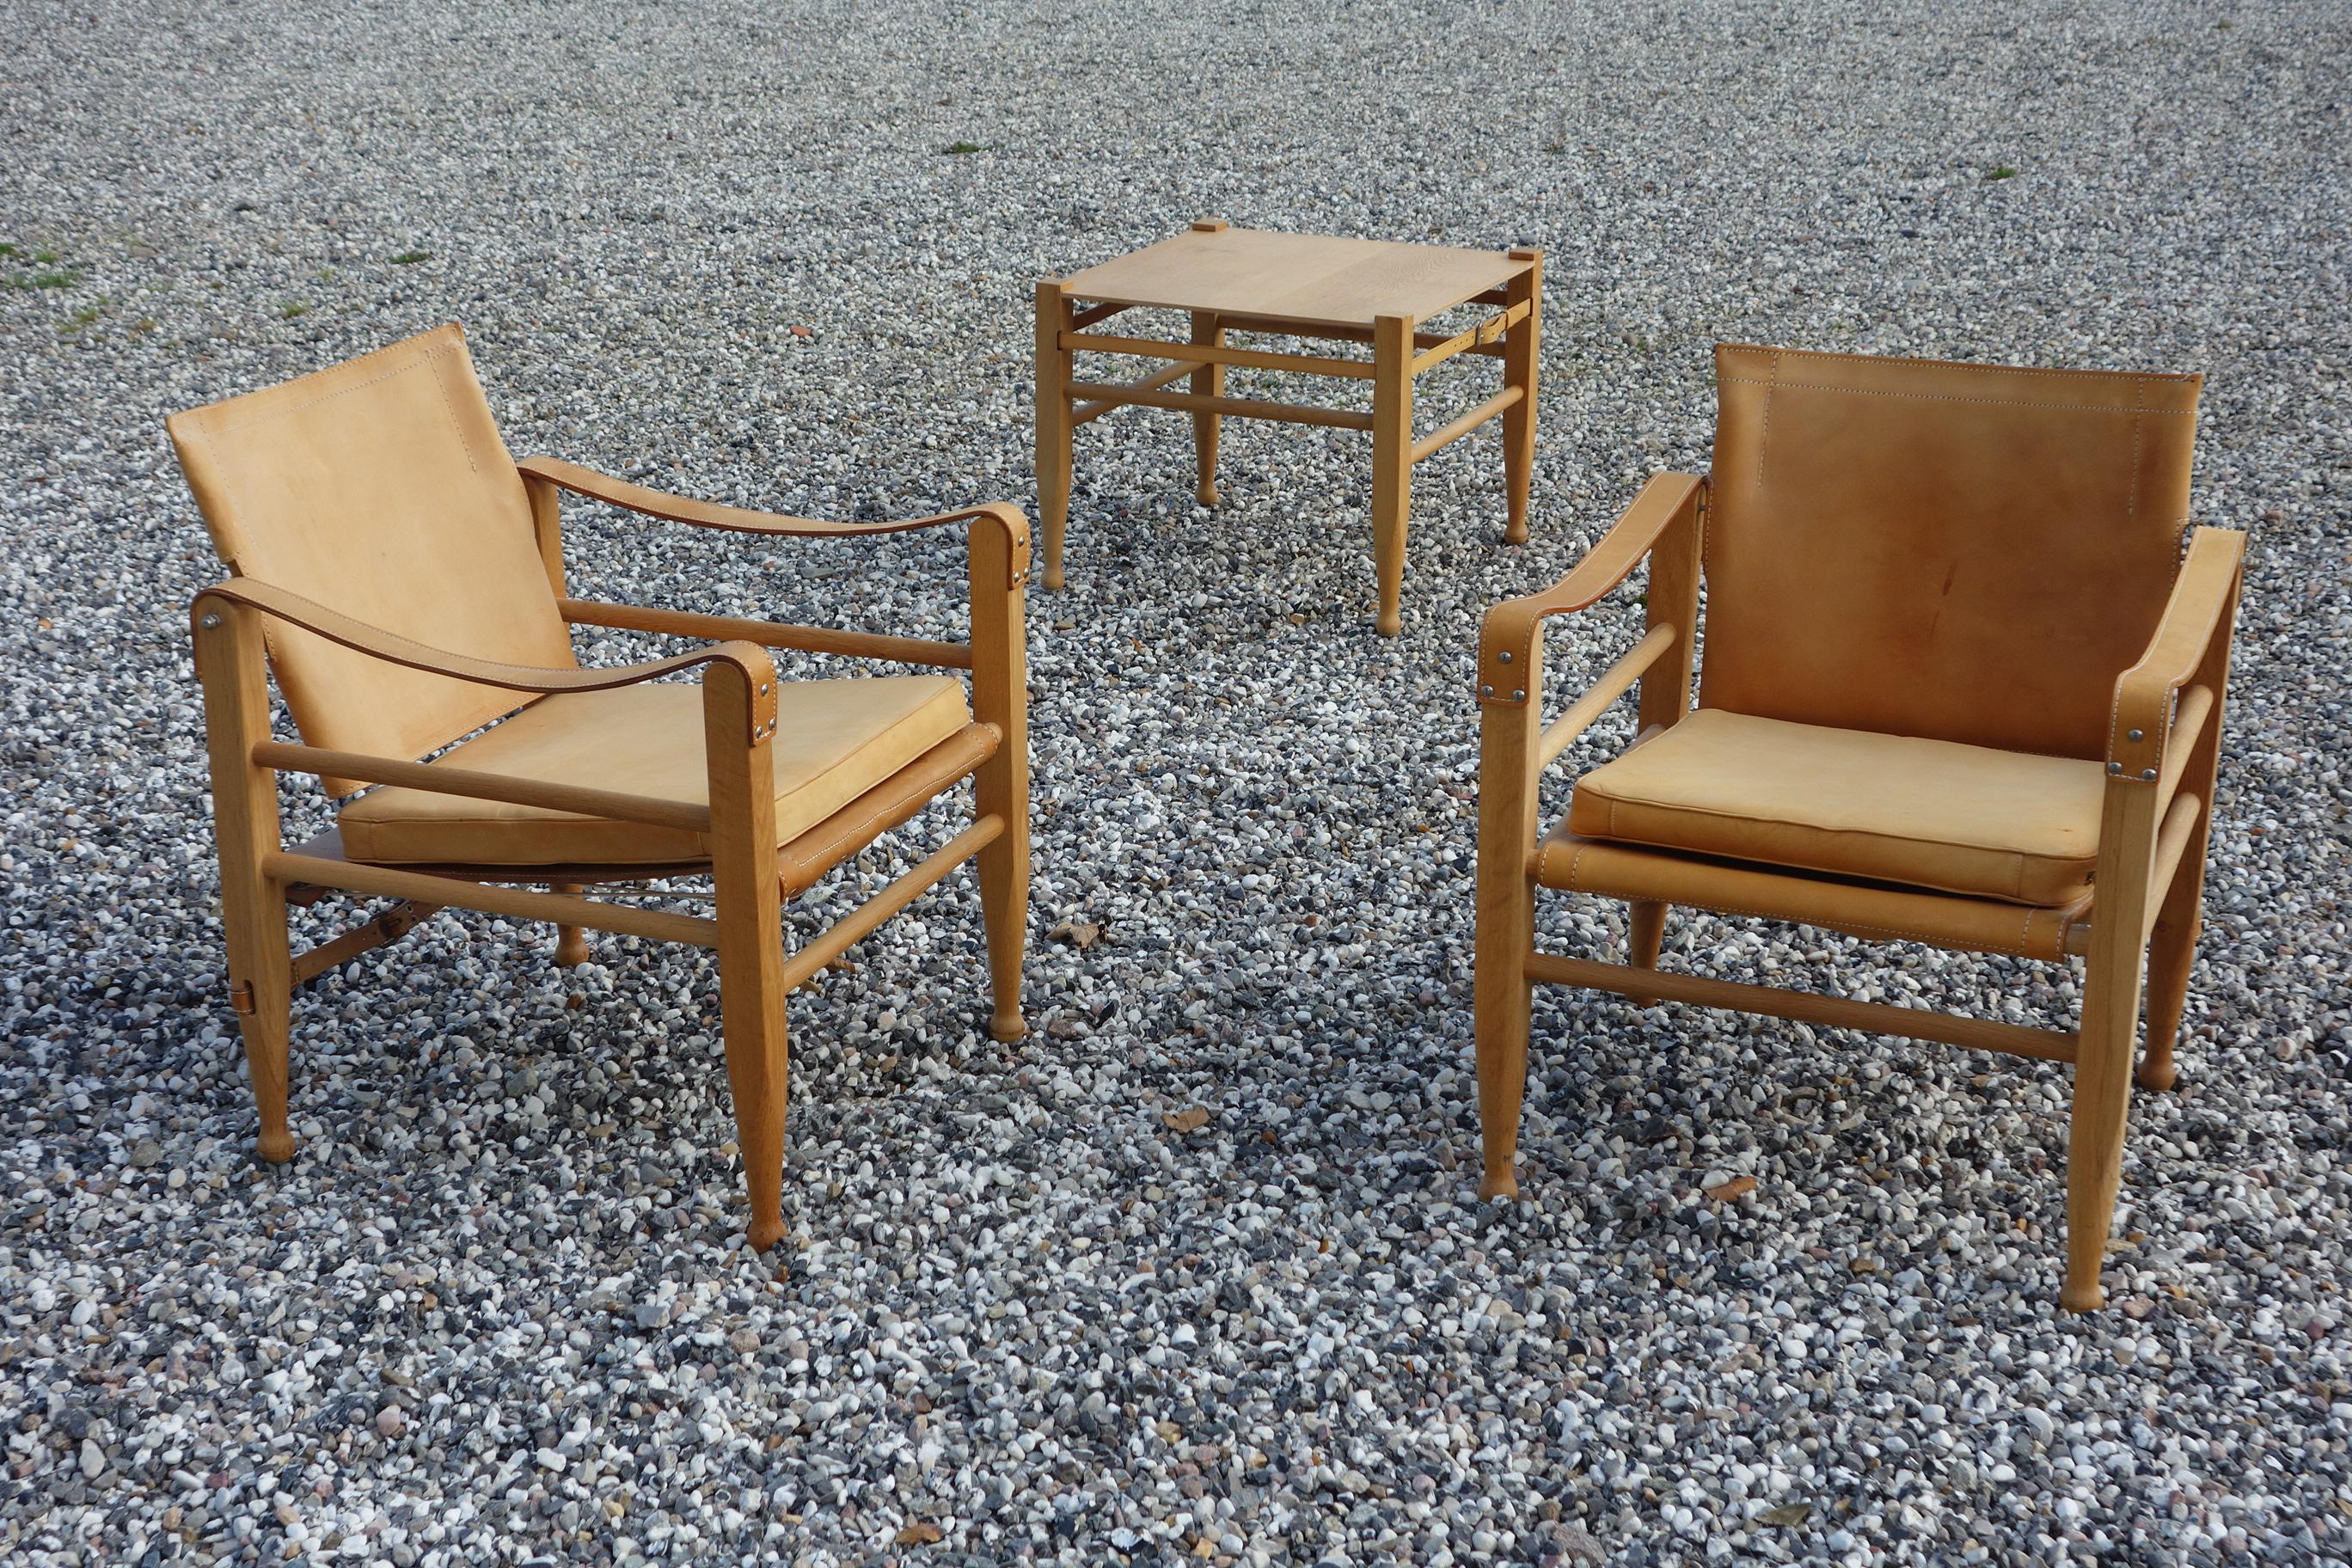 A pair of Danish oxhide safari chairs Kaare Klint style from 1970. Attributed to Børge Mogensen and lately to Aage Bruun & Son. Extremely well kept and mint condition. Comes with the original table that is rarely seen. A beautiful set of safari